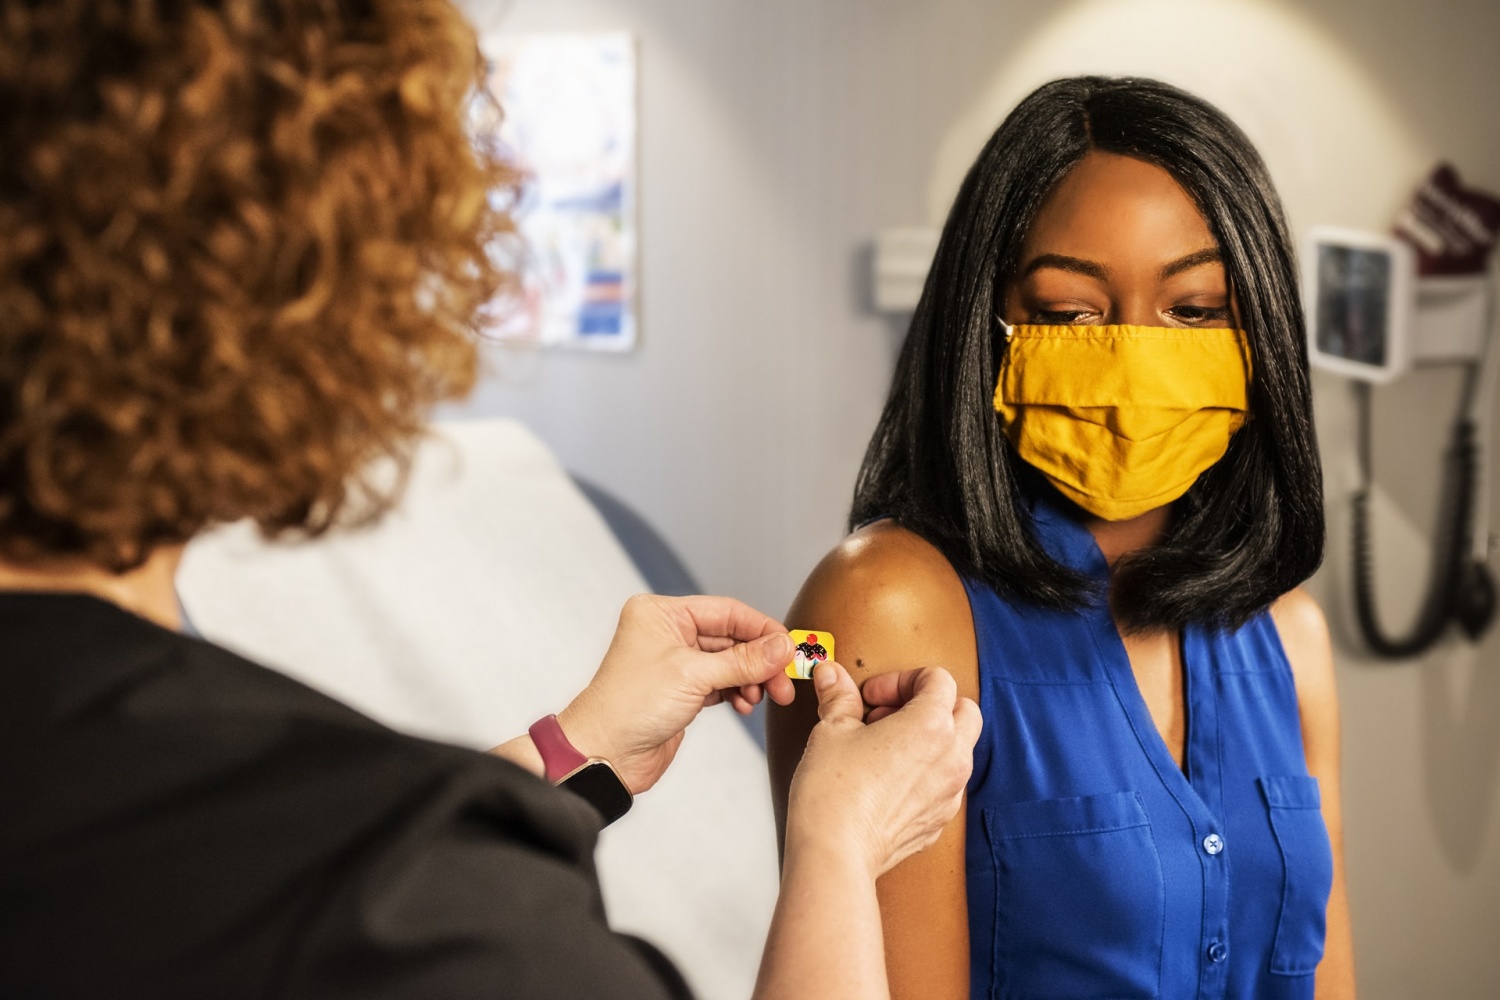 HPV Vaccine Reduces Risk of Cervical Cancer by 90%